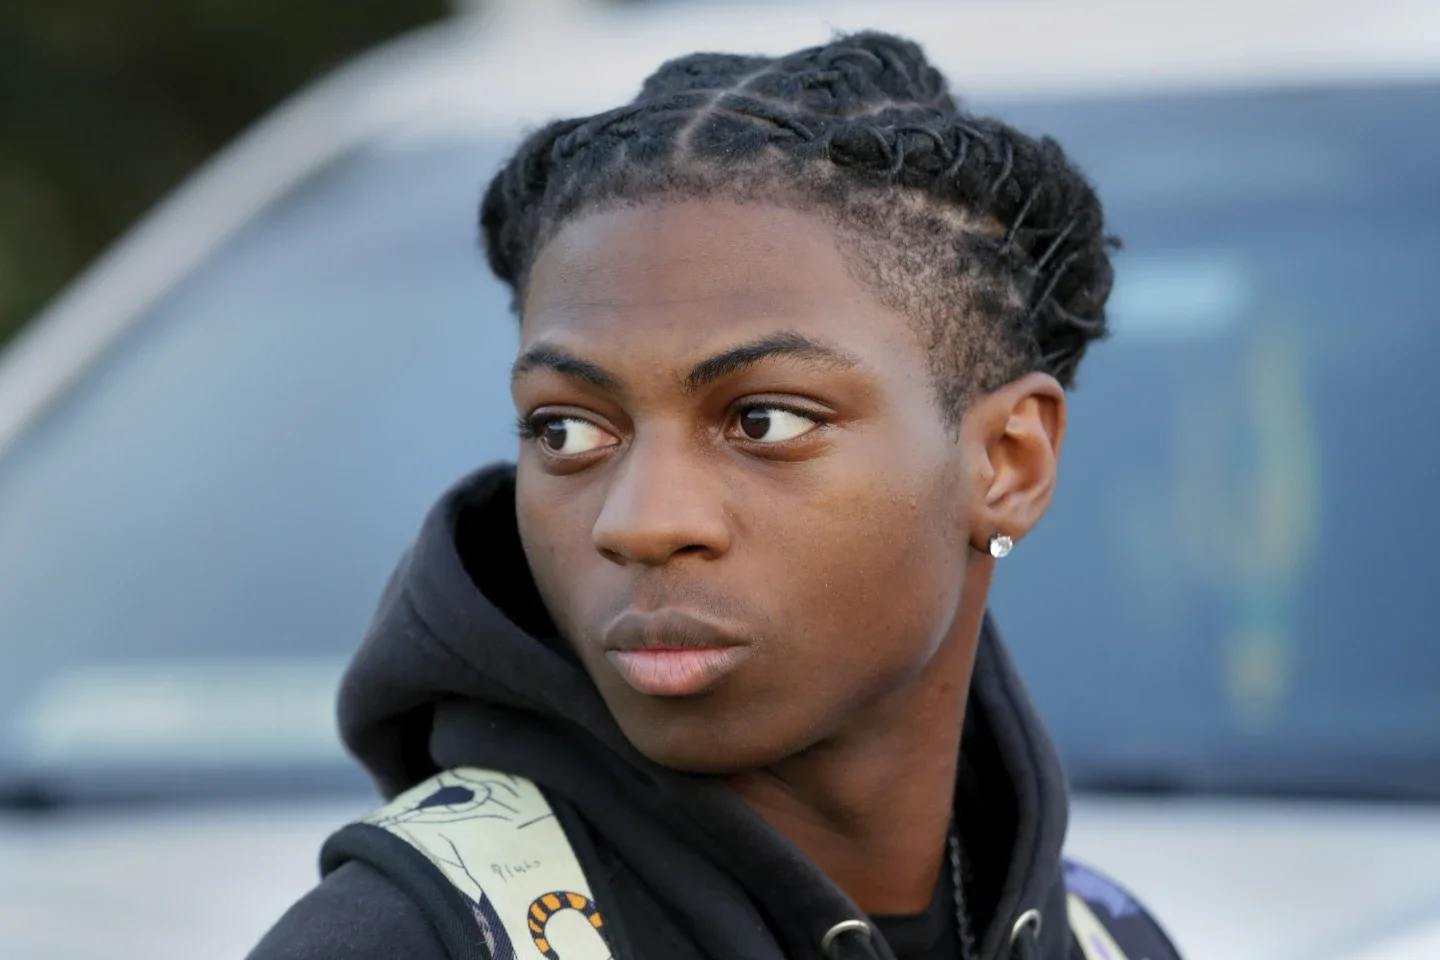 Texas Judge Rules That School Legally Punished Black Student Over His Hairstyle